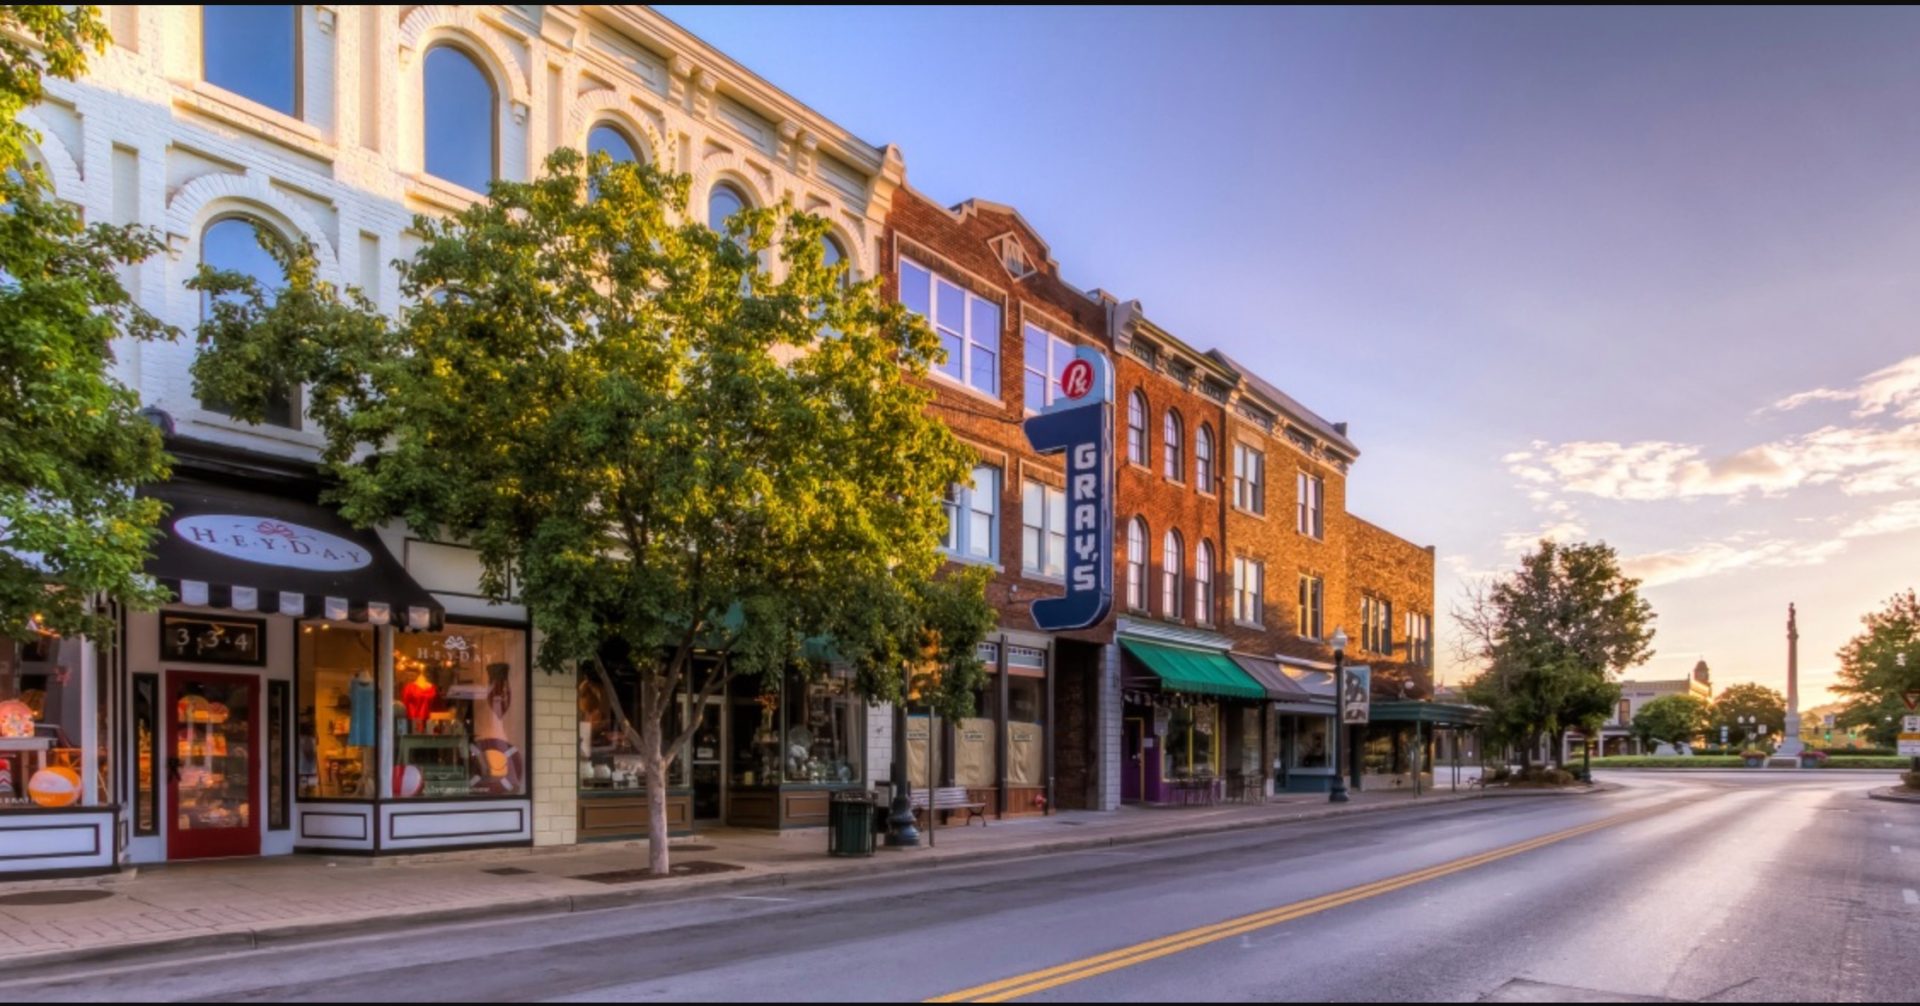 Restaurants In Franklin Tn Downtown Franklin Brentwood Tn That You Don T Want To Miss